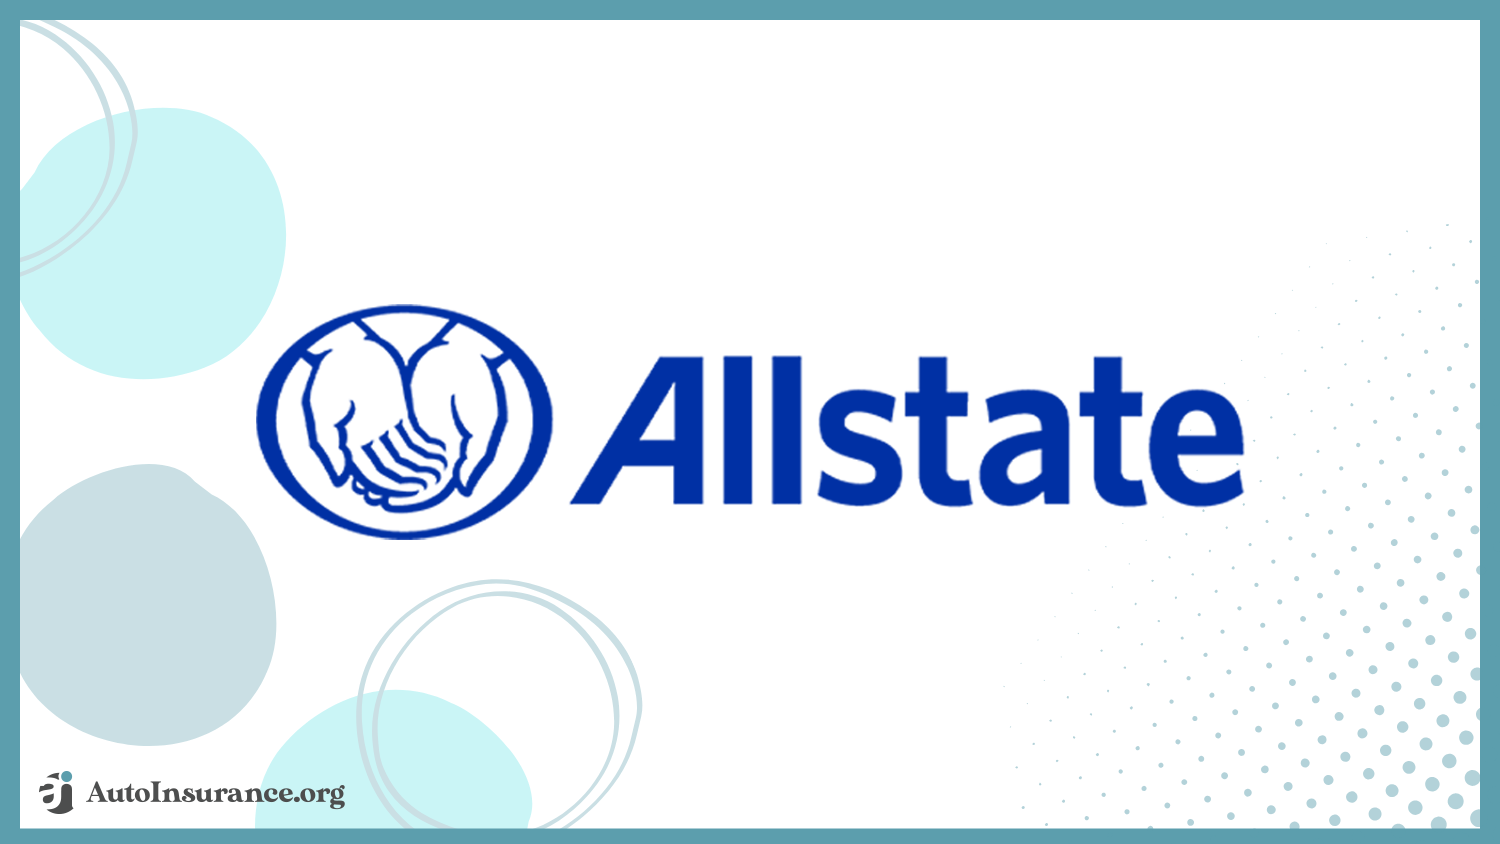 Allstate: Best Auto Insurance for Single Adults